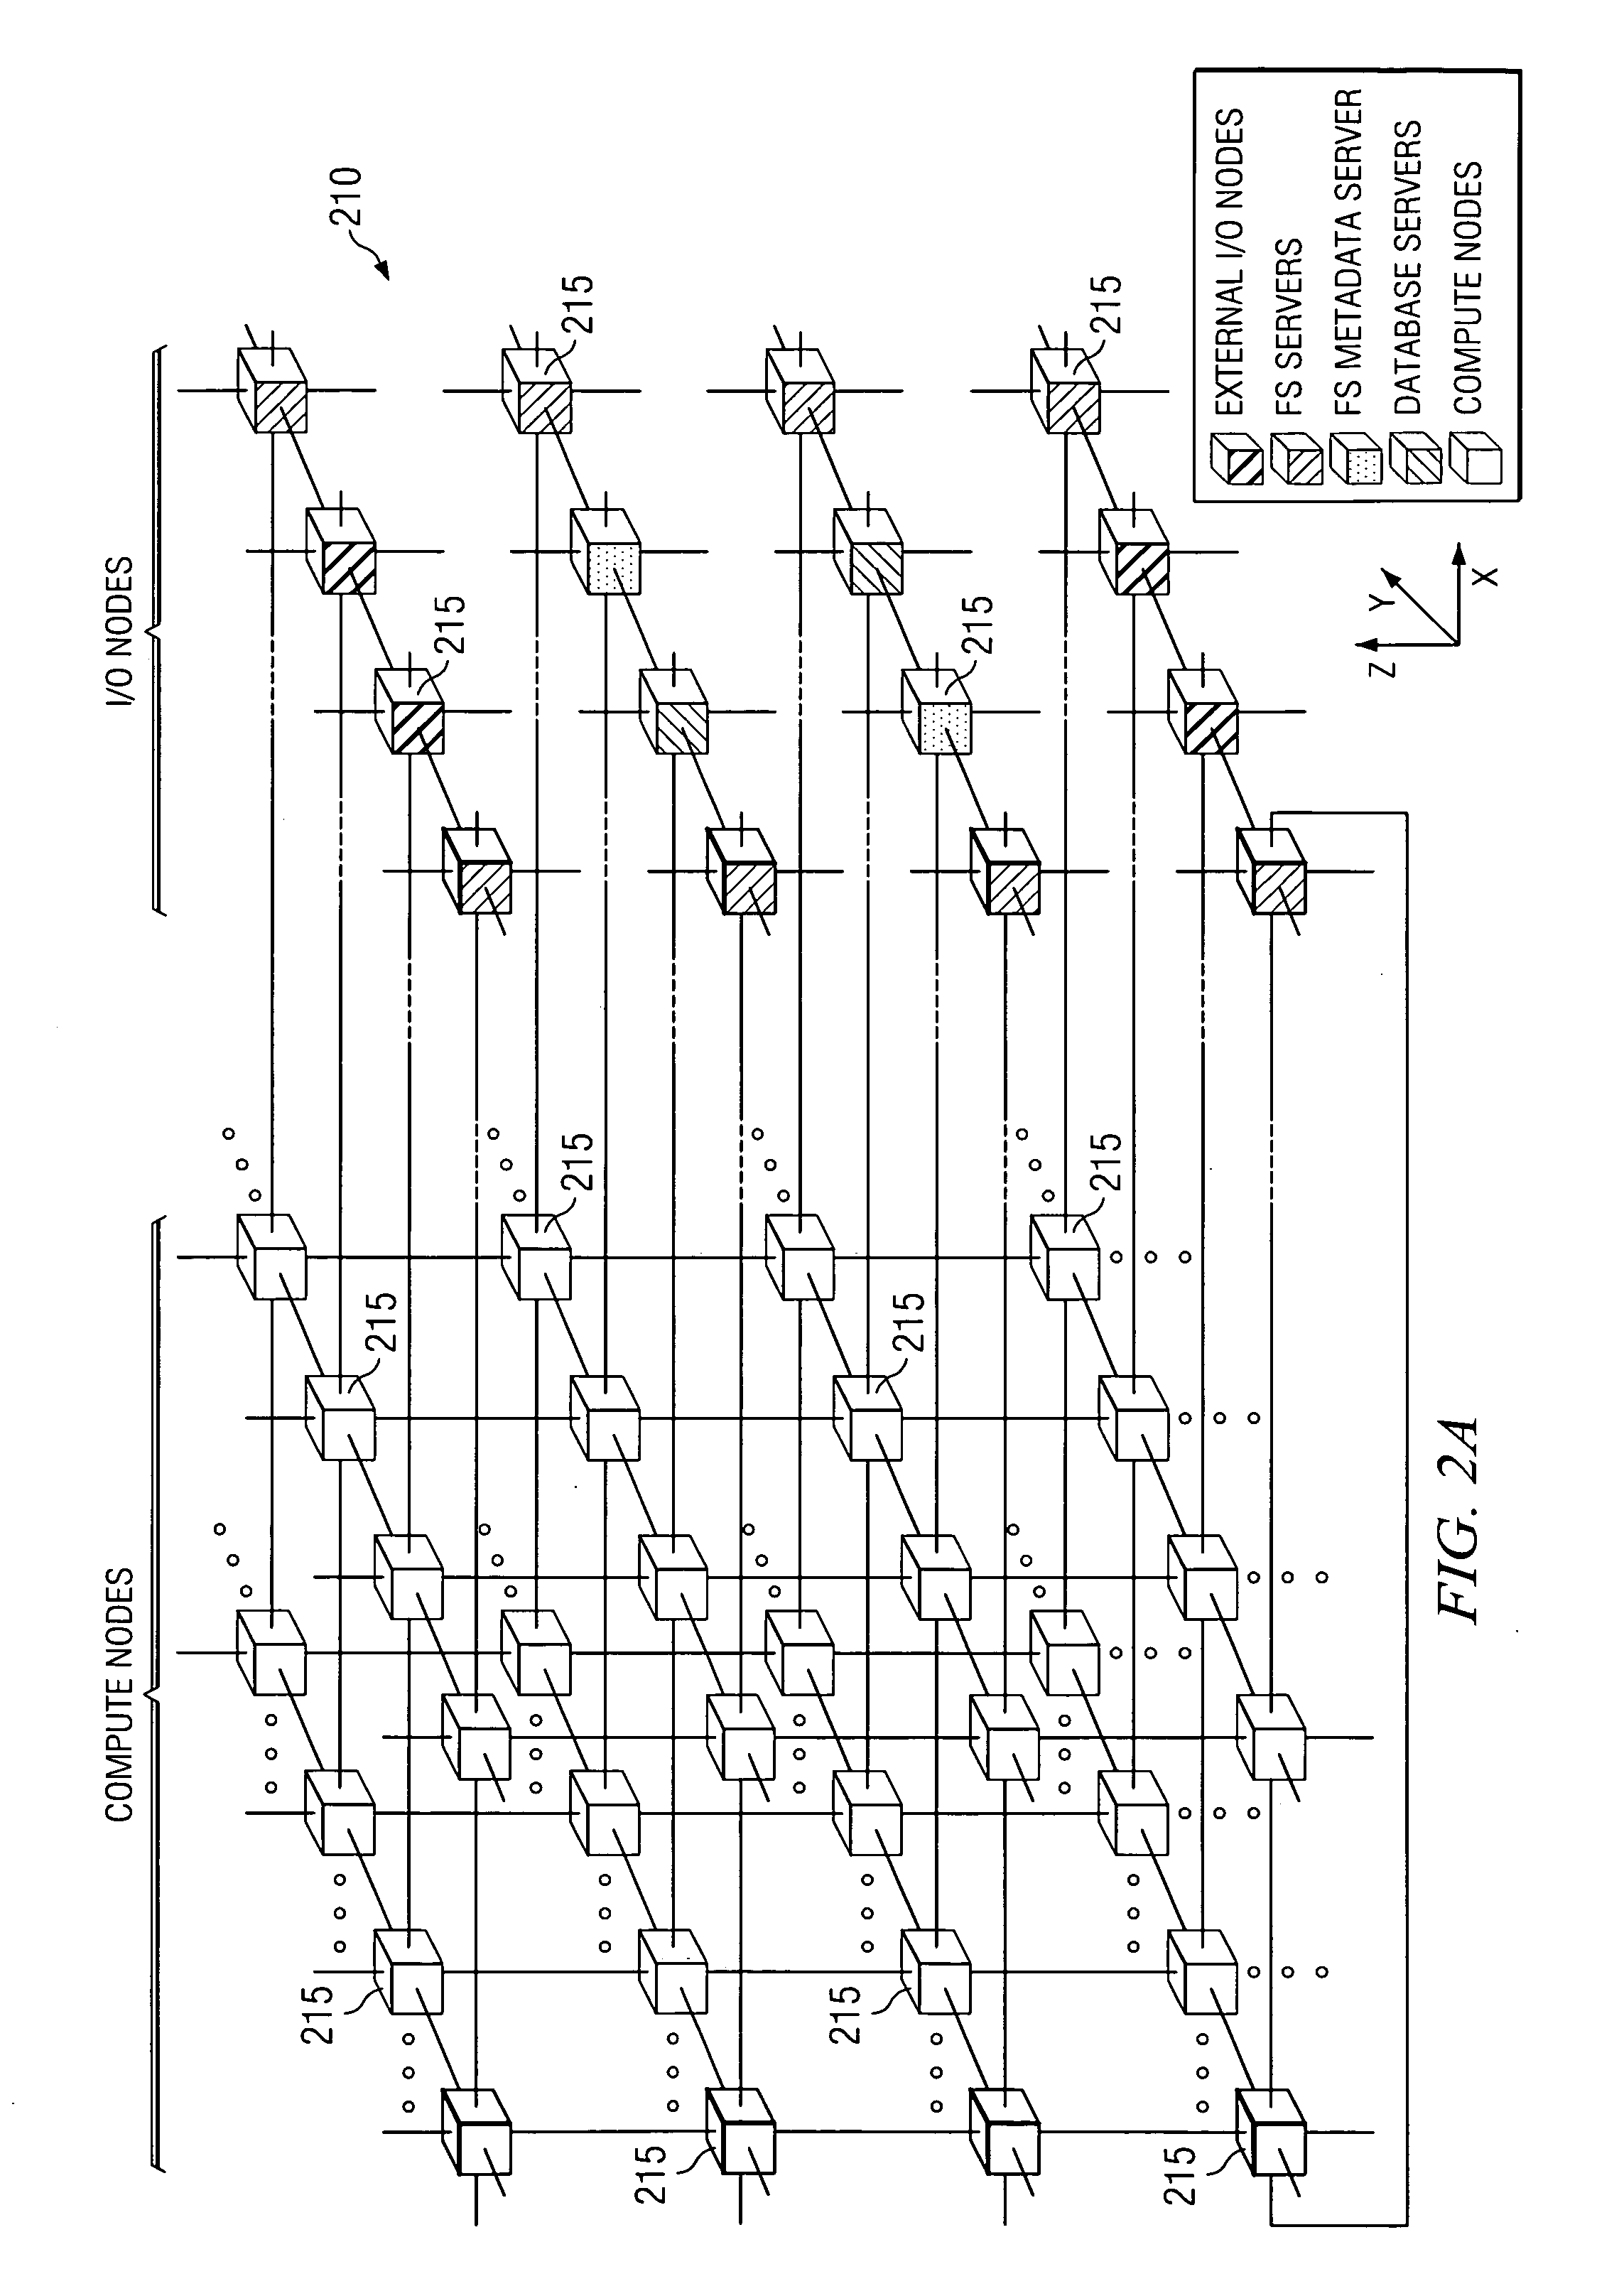 System and method for topology-aware job scheduling and backfilling in an HPC environment